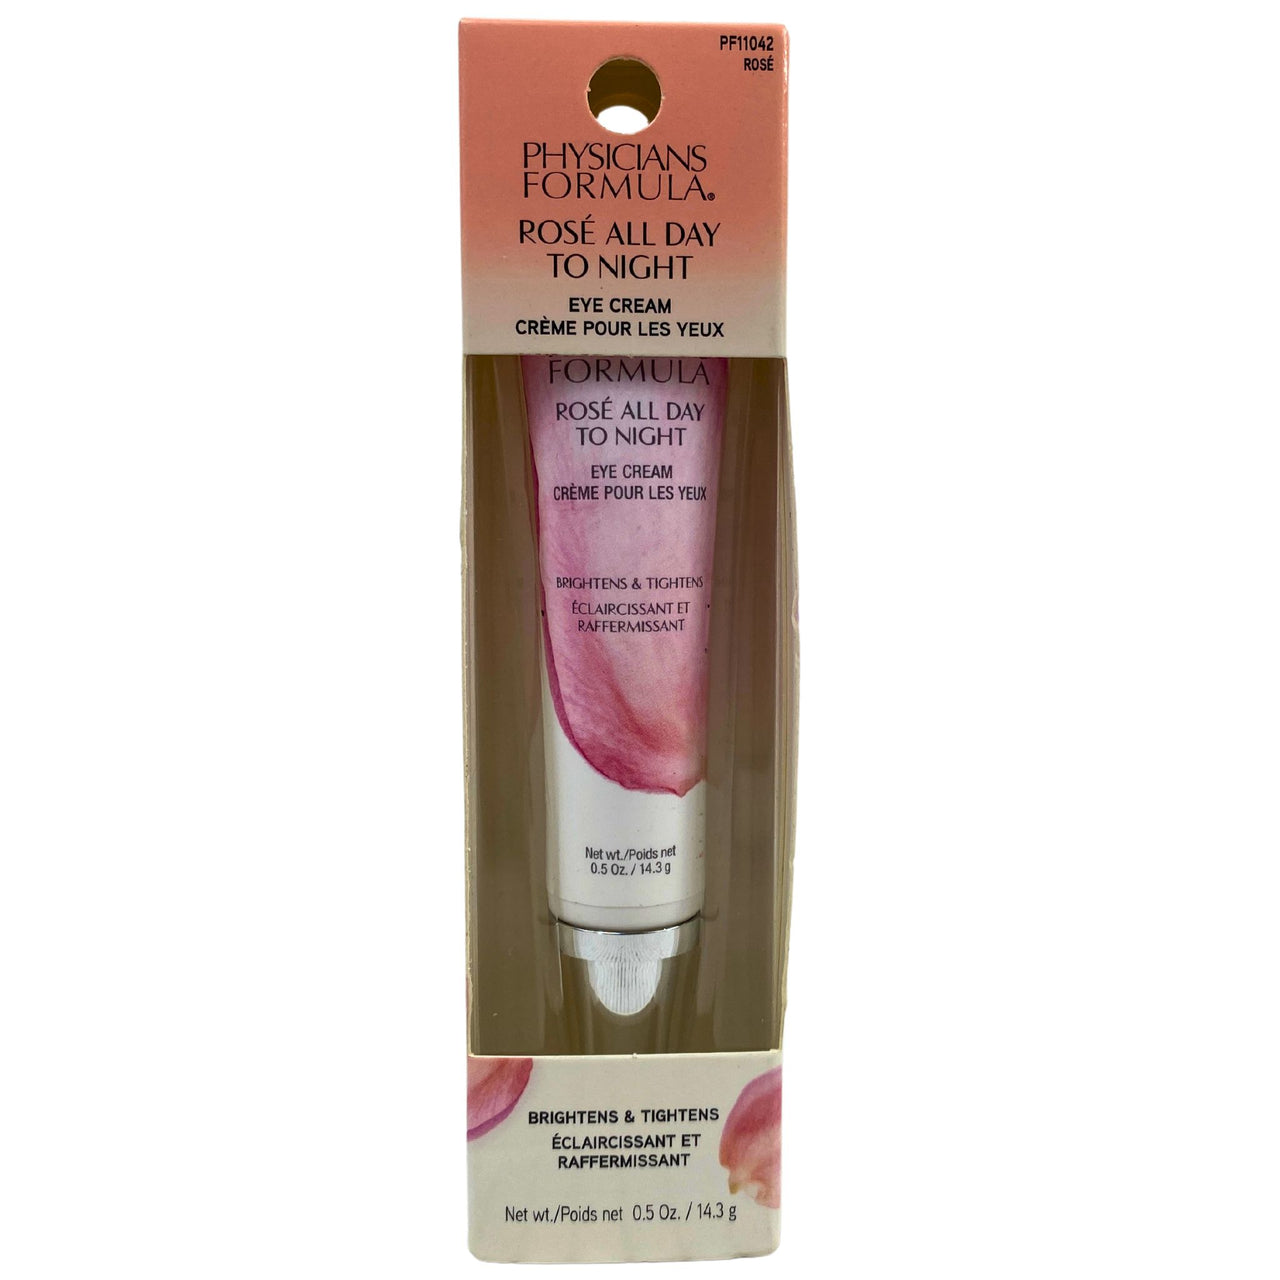 Physicians Formula Rose All Day To Night Eye Cream Brightens & Tightens 